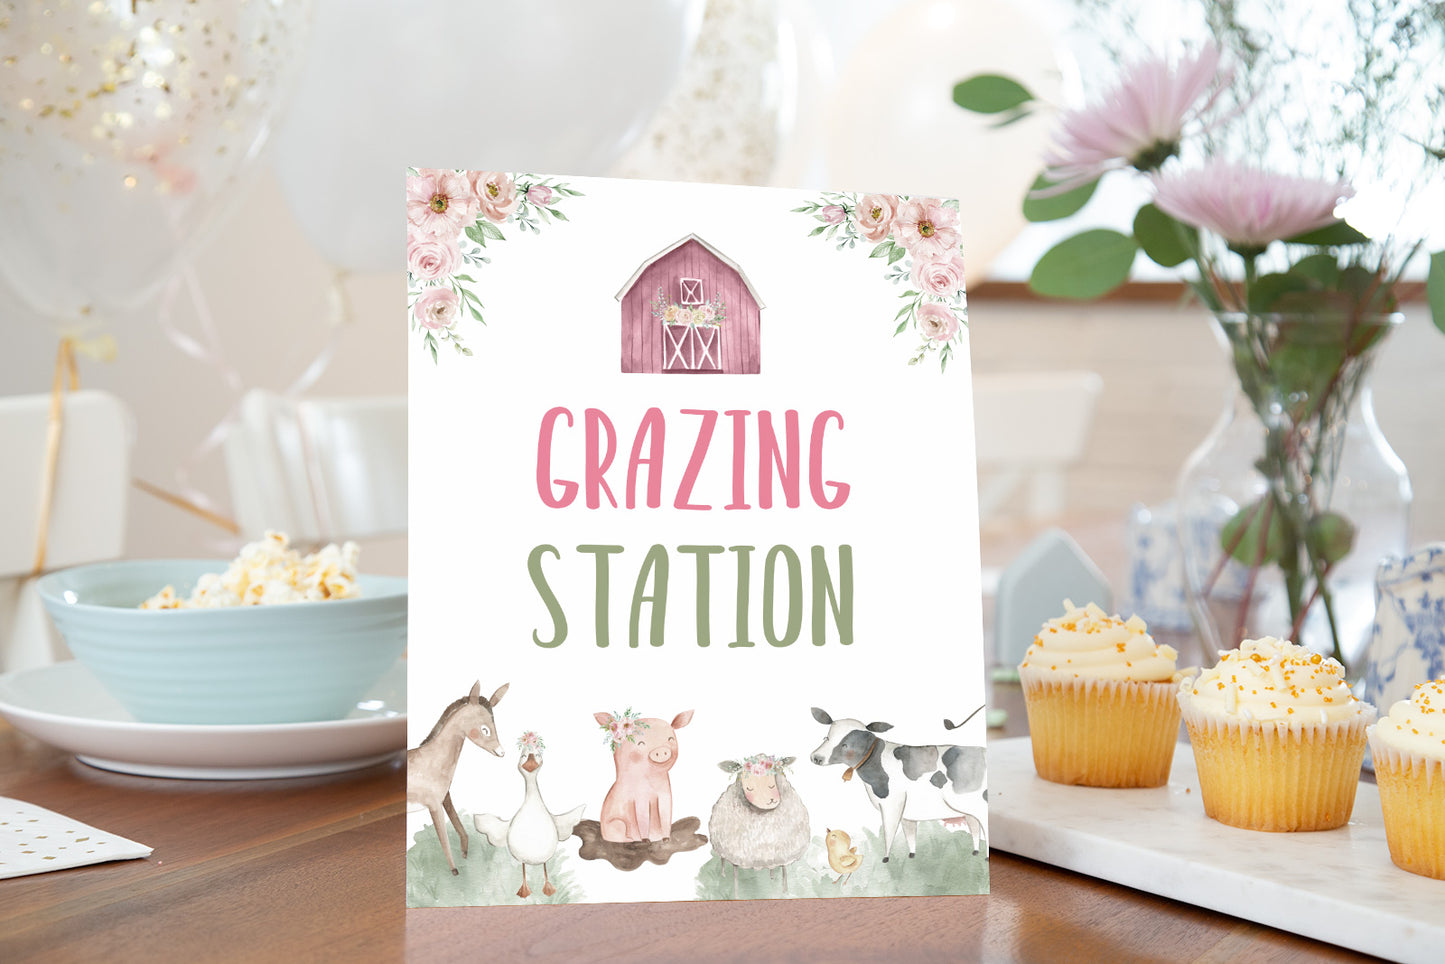 Grazing Station Sign | Girl Farm Party Decorations - 11B